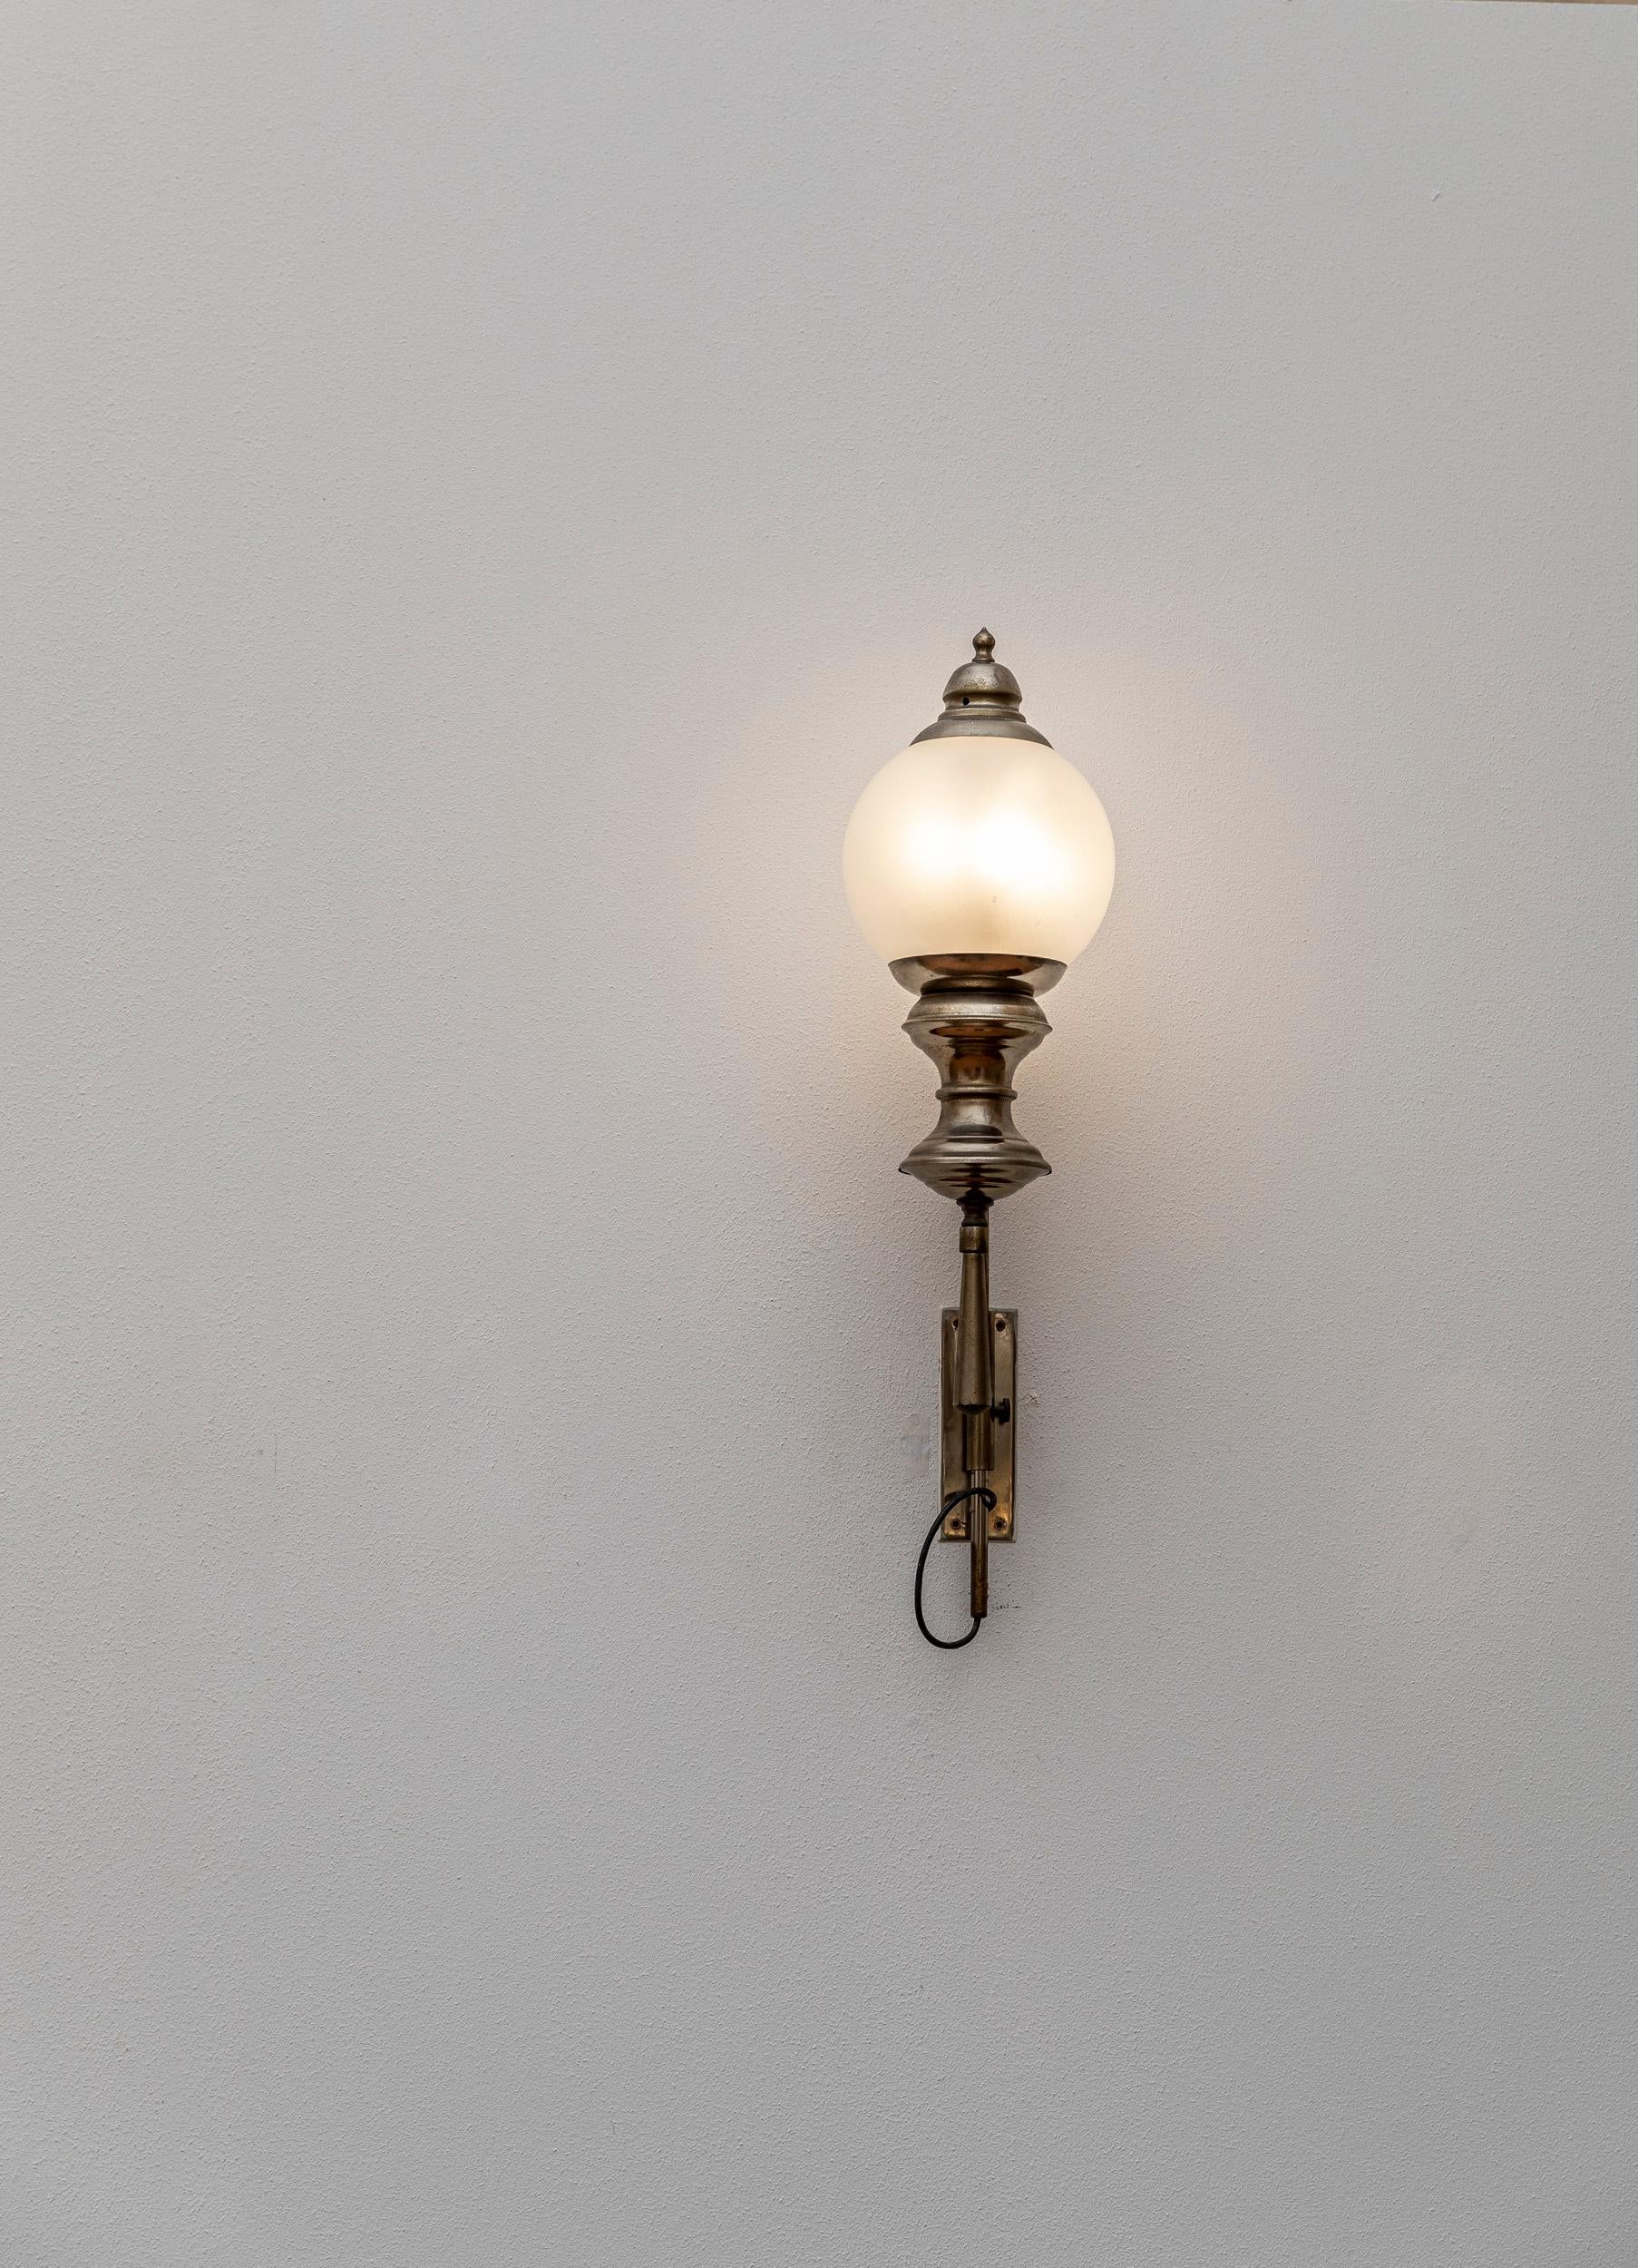 Classy and sophisticated set of three wall lights attributed to Luigi Caccia Dominioni. These lights have a sinuous arm and a decorated base holder made of brass. The lighting element is nestled in the brass structure and holds an elegant